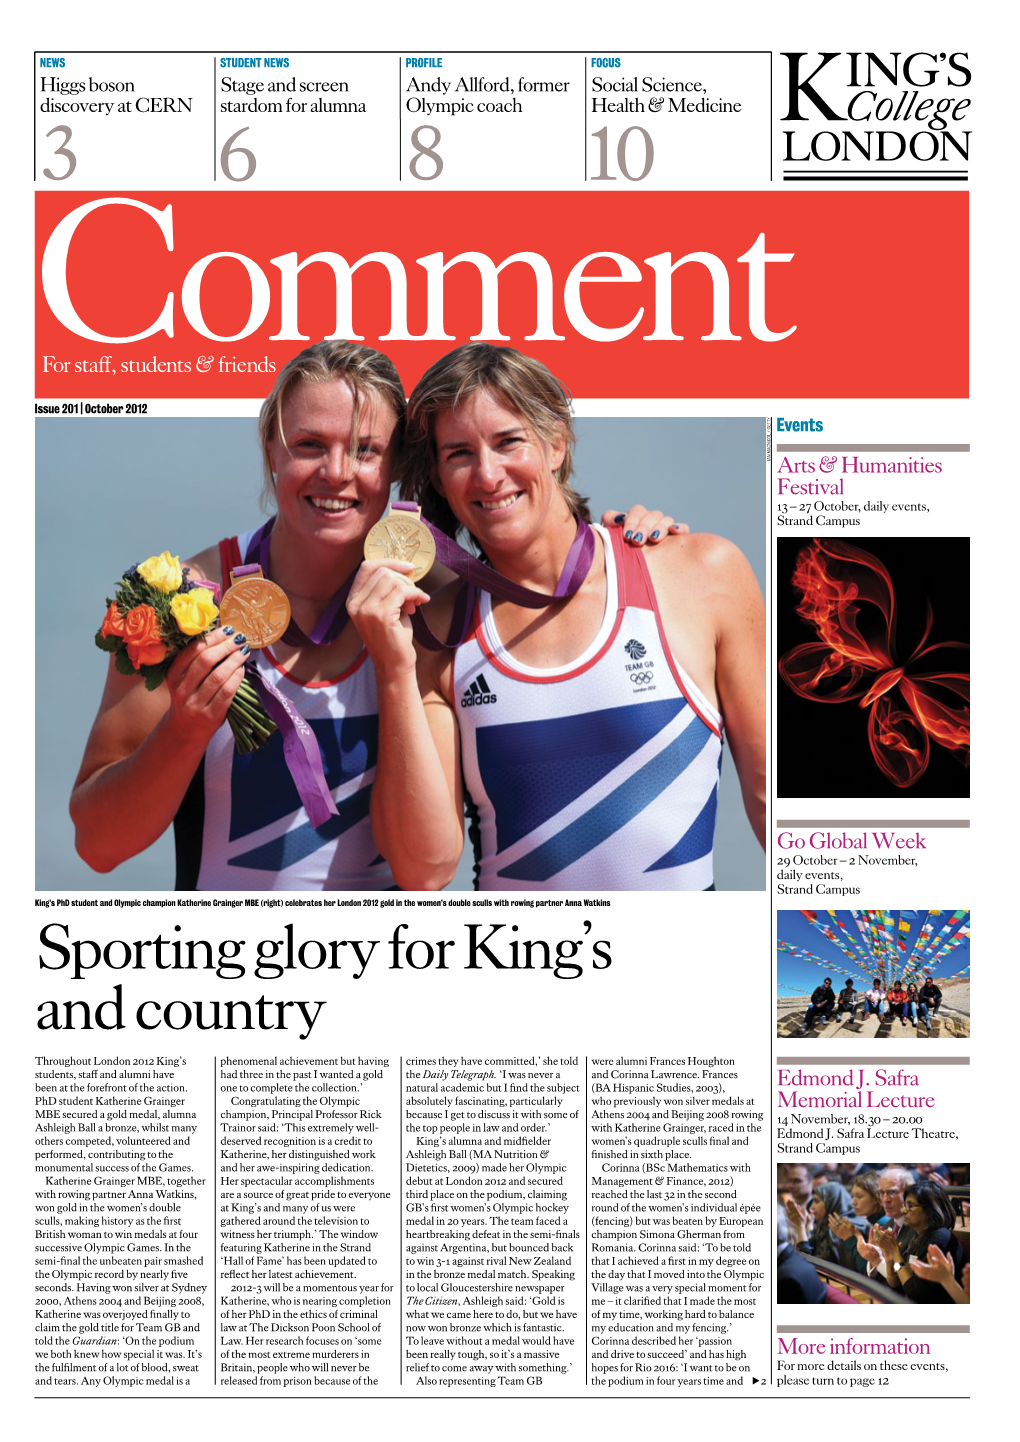 Sporting Glory for King's and Country